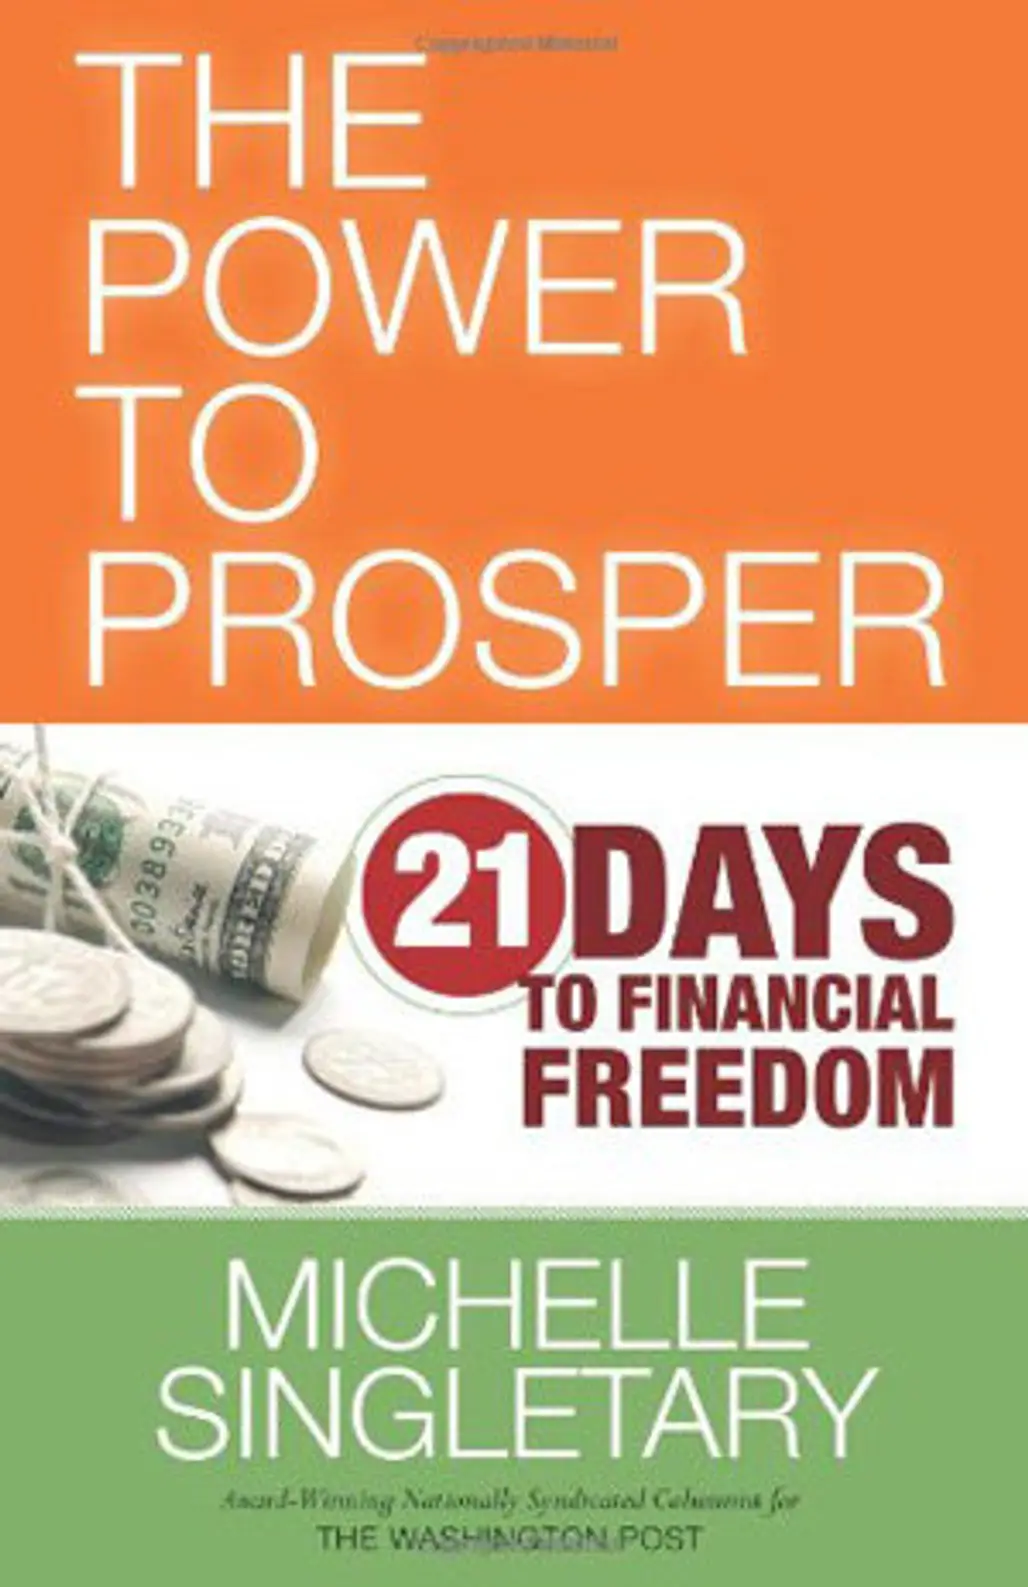 The Power to Prosper: 21 Days to Financial Freedom by Michelle Singletary